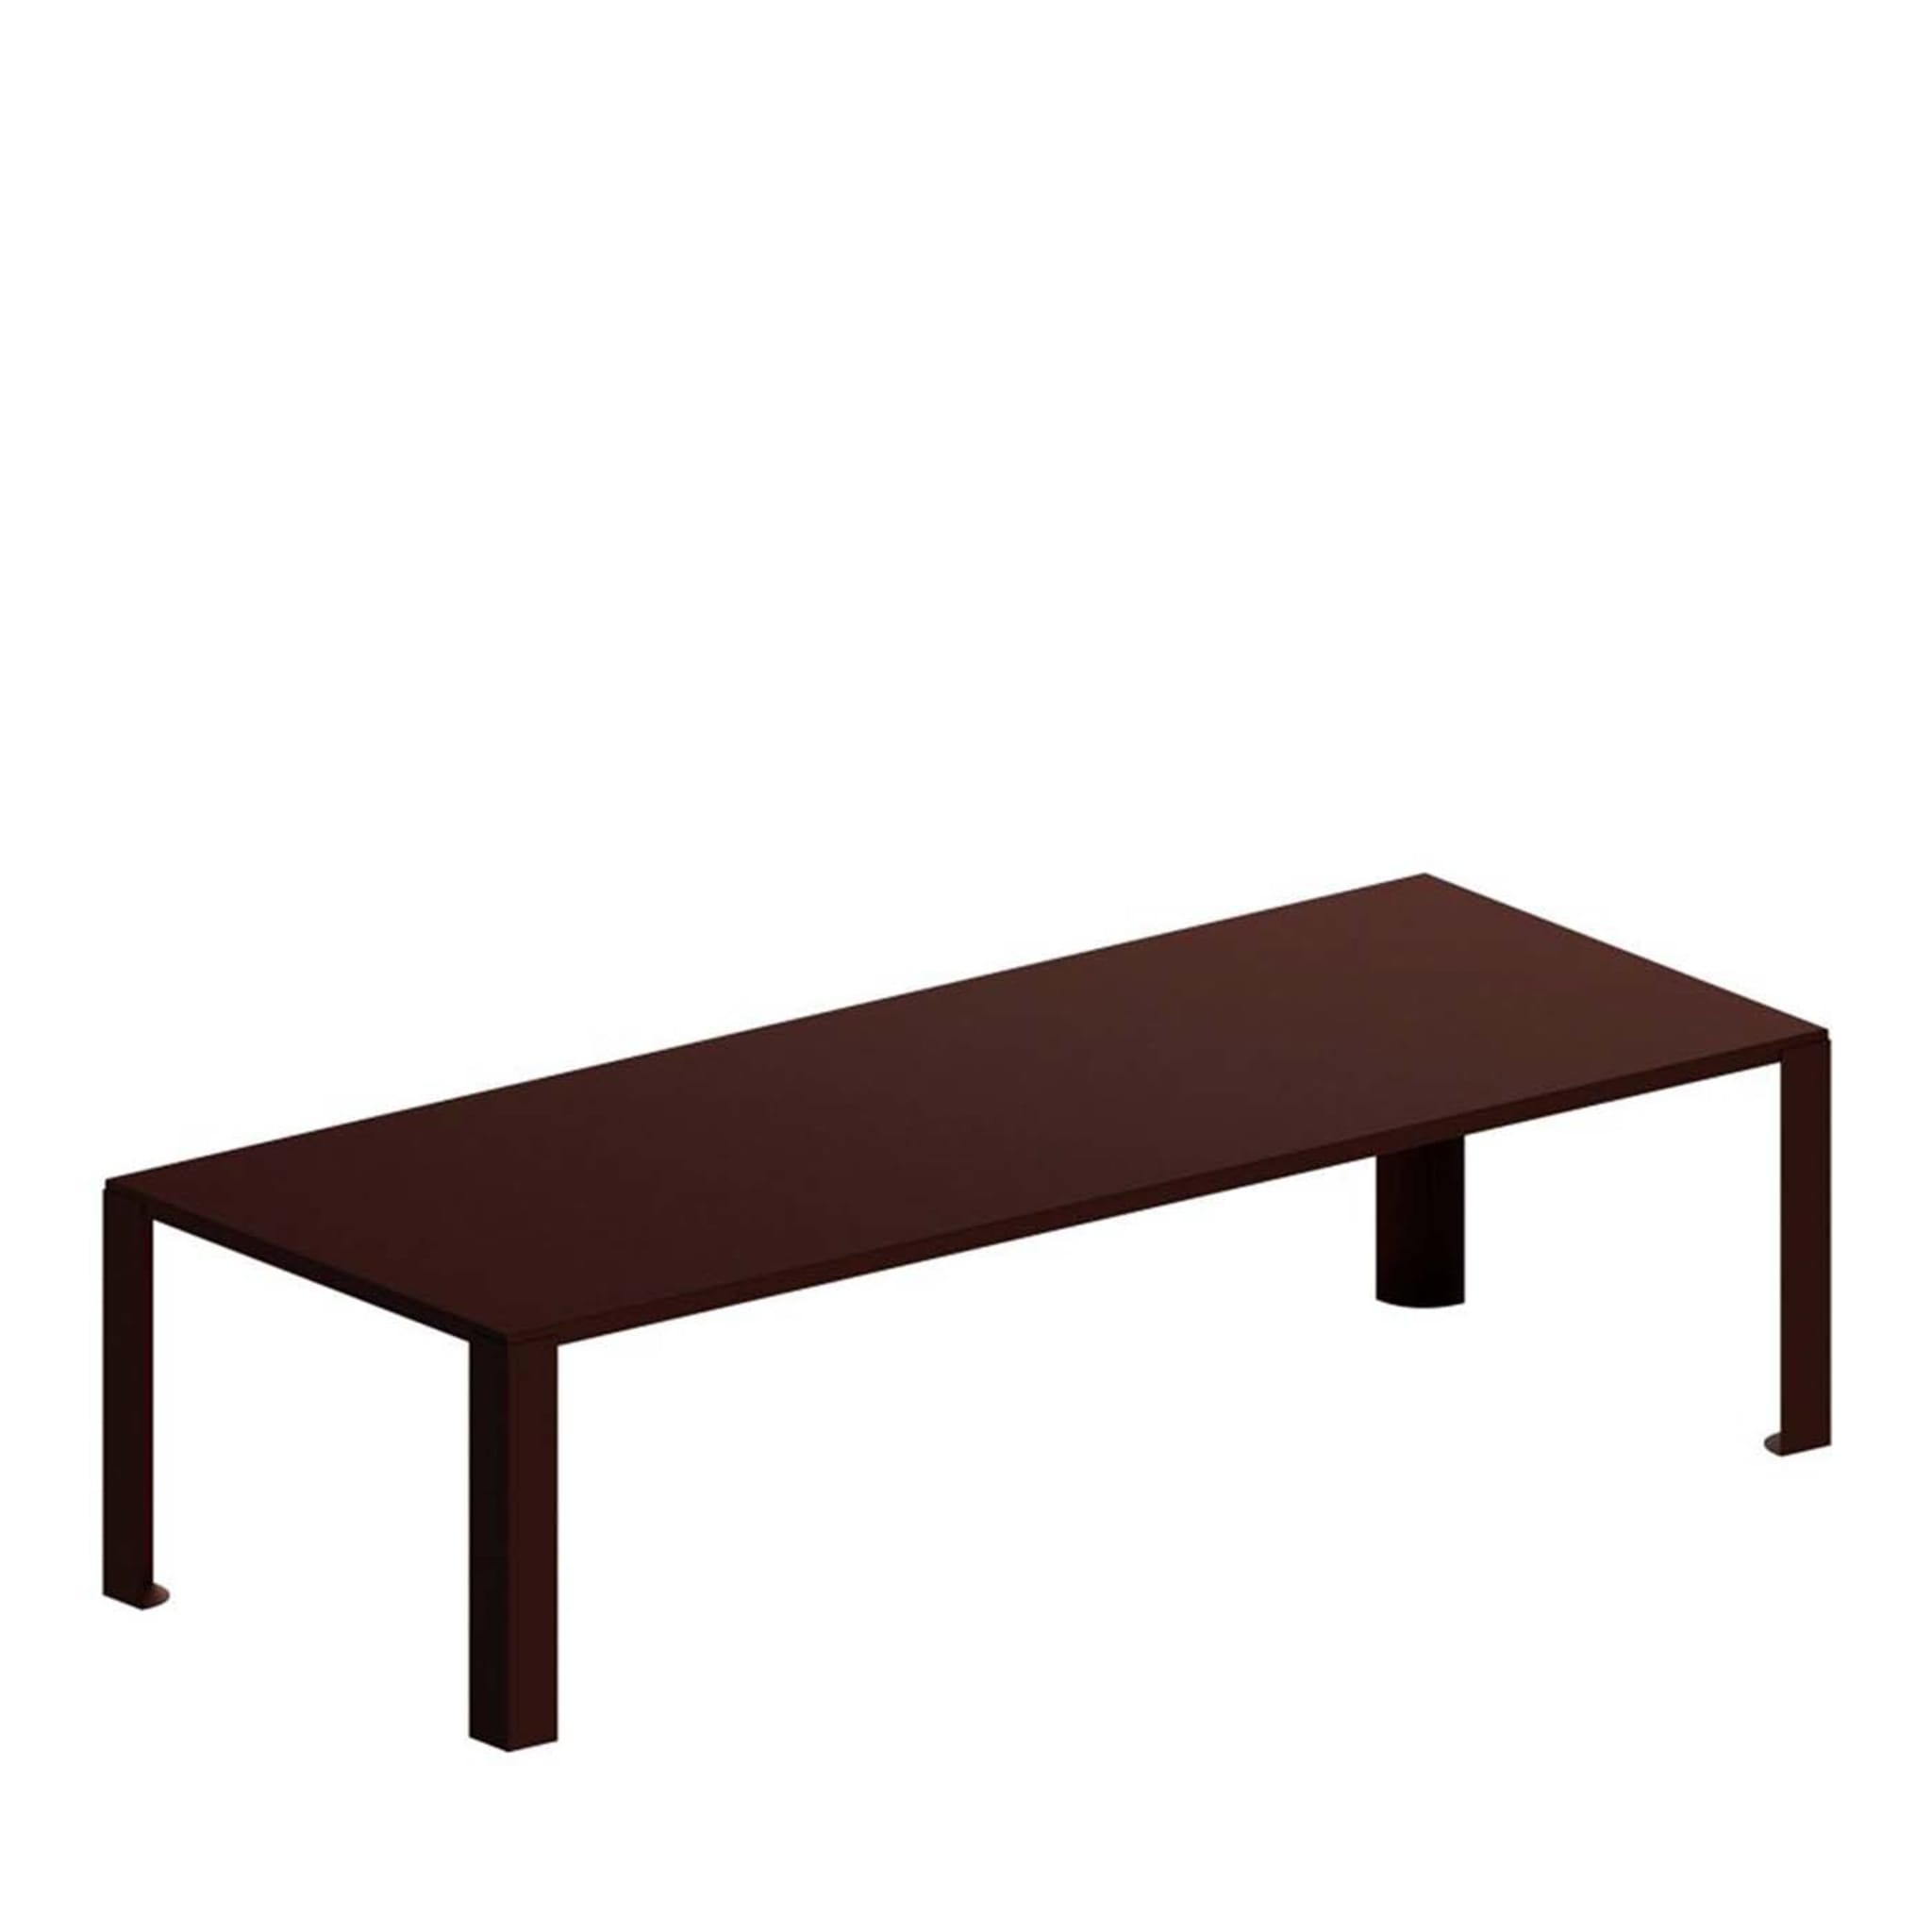 Big Irony Rust Outdoor Table by Maurizio Peregalli - Main view